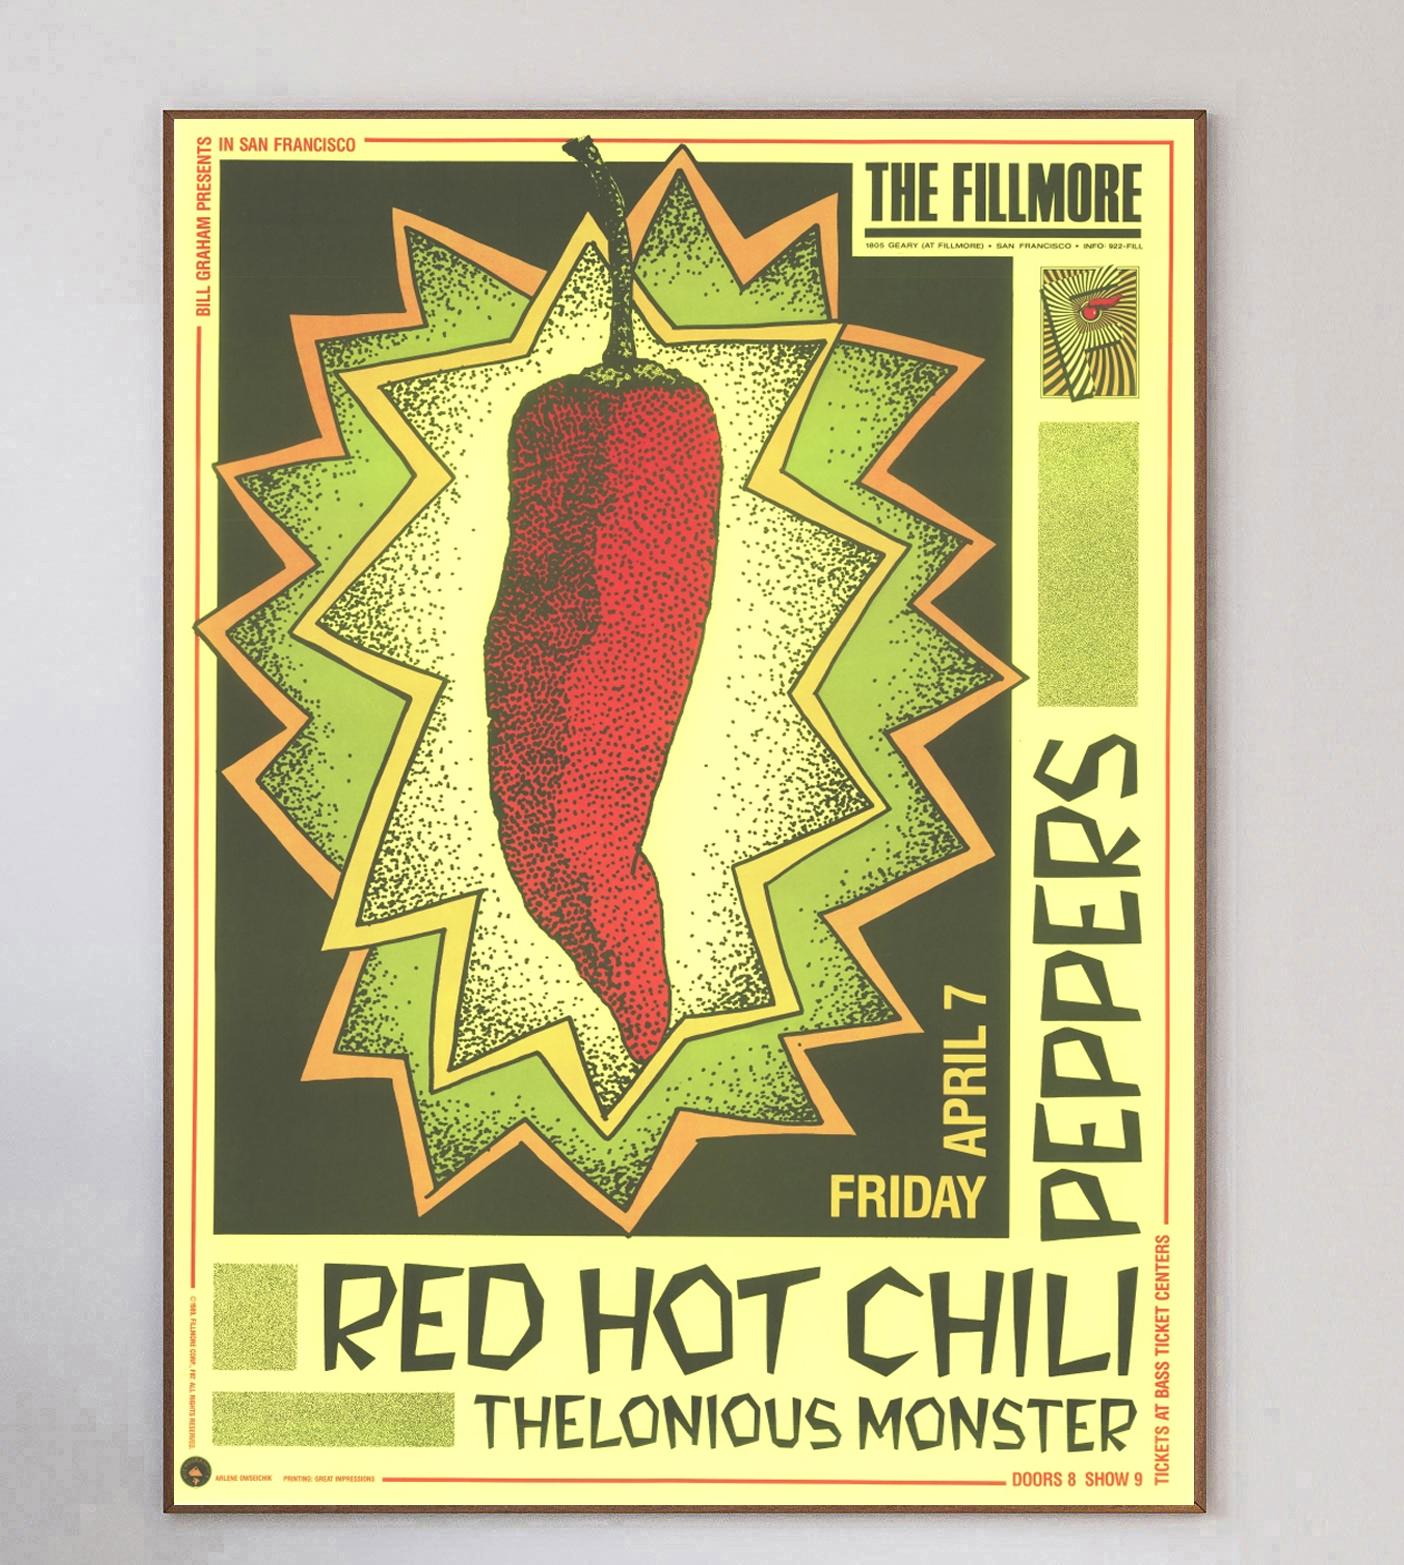 Designed by concert poster artist Arlene Owseichik, this beautiful poster was created in 1989 to promote a live concert of The Red Hot Chili Peppers at the world famous Fillmore in San Francisco. Events such as this were well known for their now